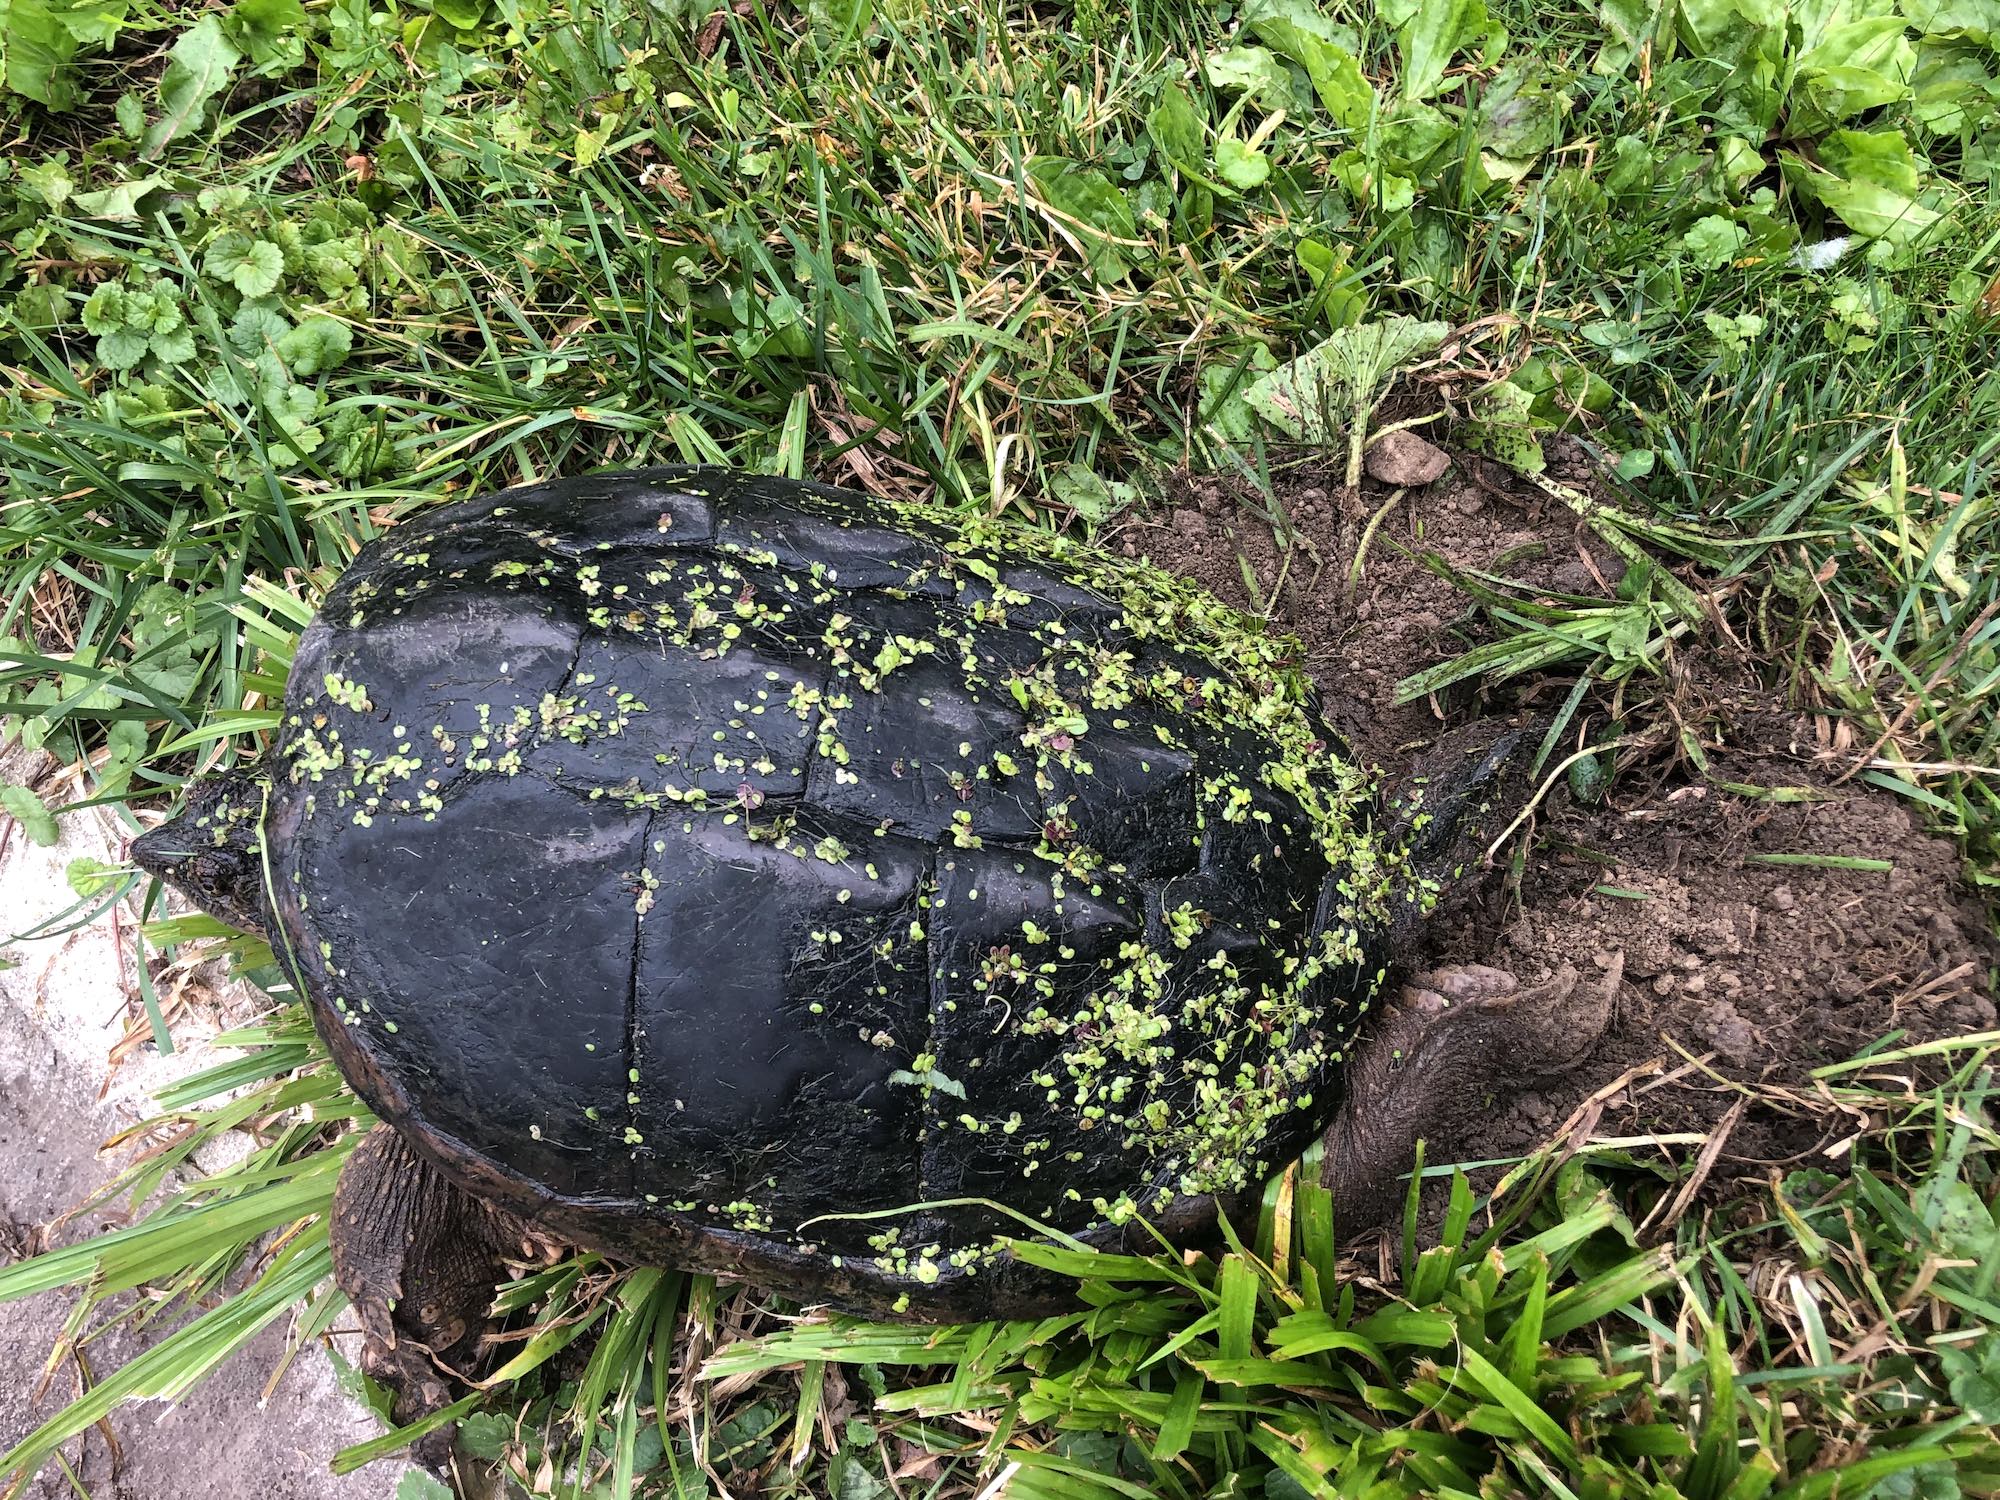 Snapping Turtle laying eggs along Arbor Drive in Madison, Wisconsin on June 24, 2019.